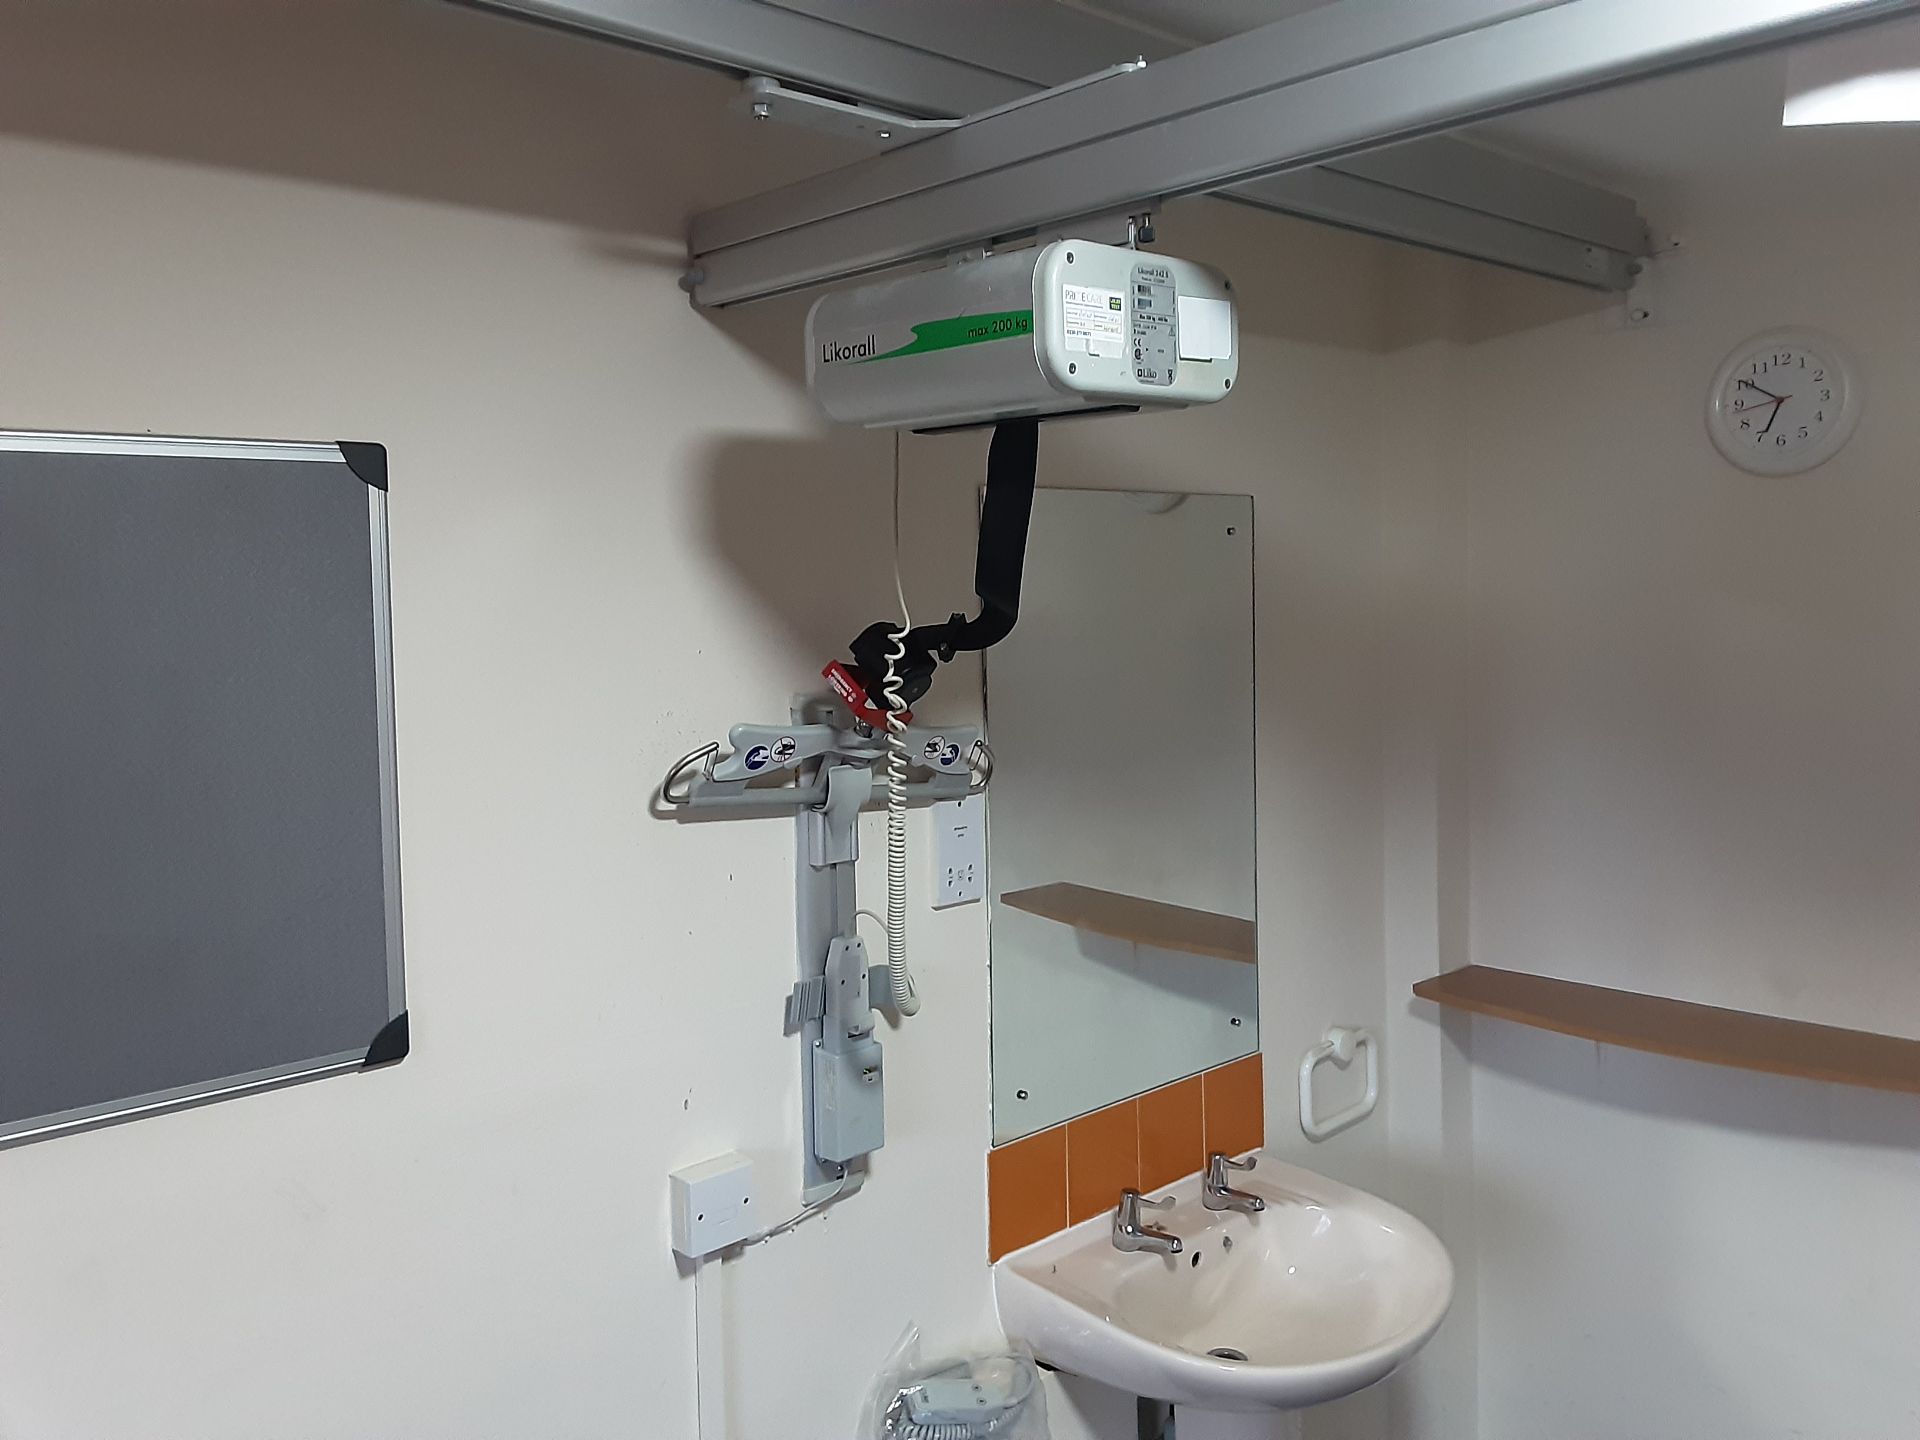 Likorall 242S R2R 200kg Patient Lift with KwikTrak Ceiling Rail System Serial No: 260865